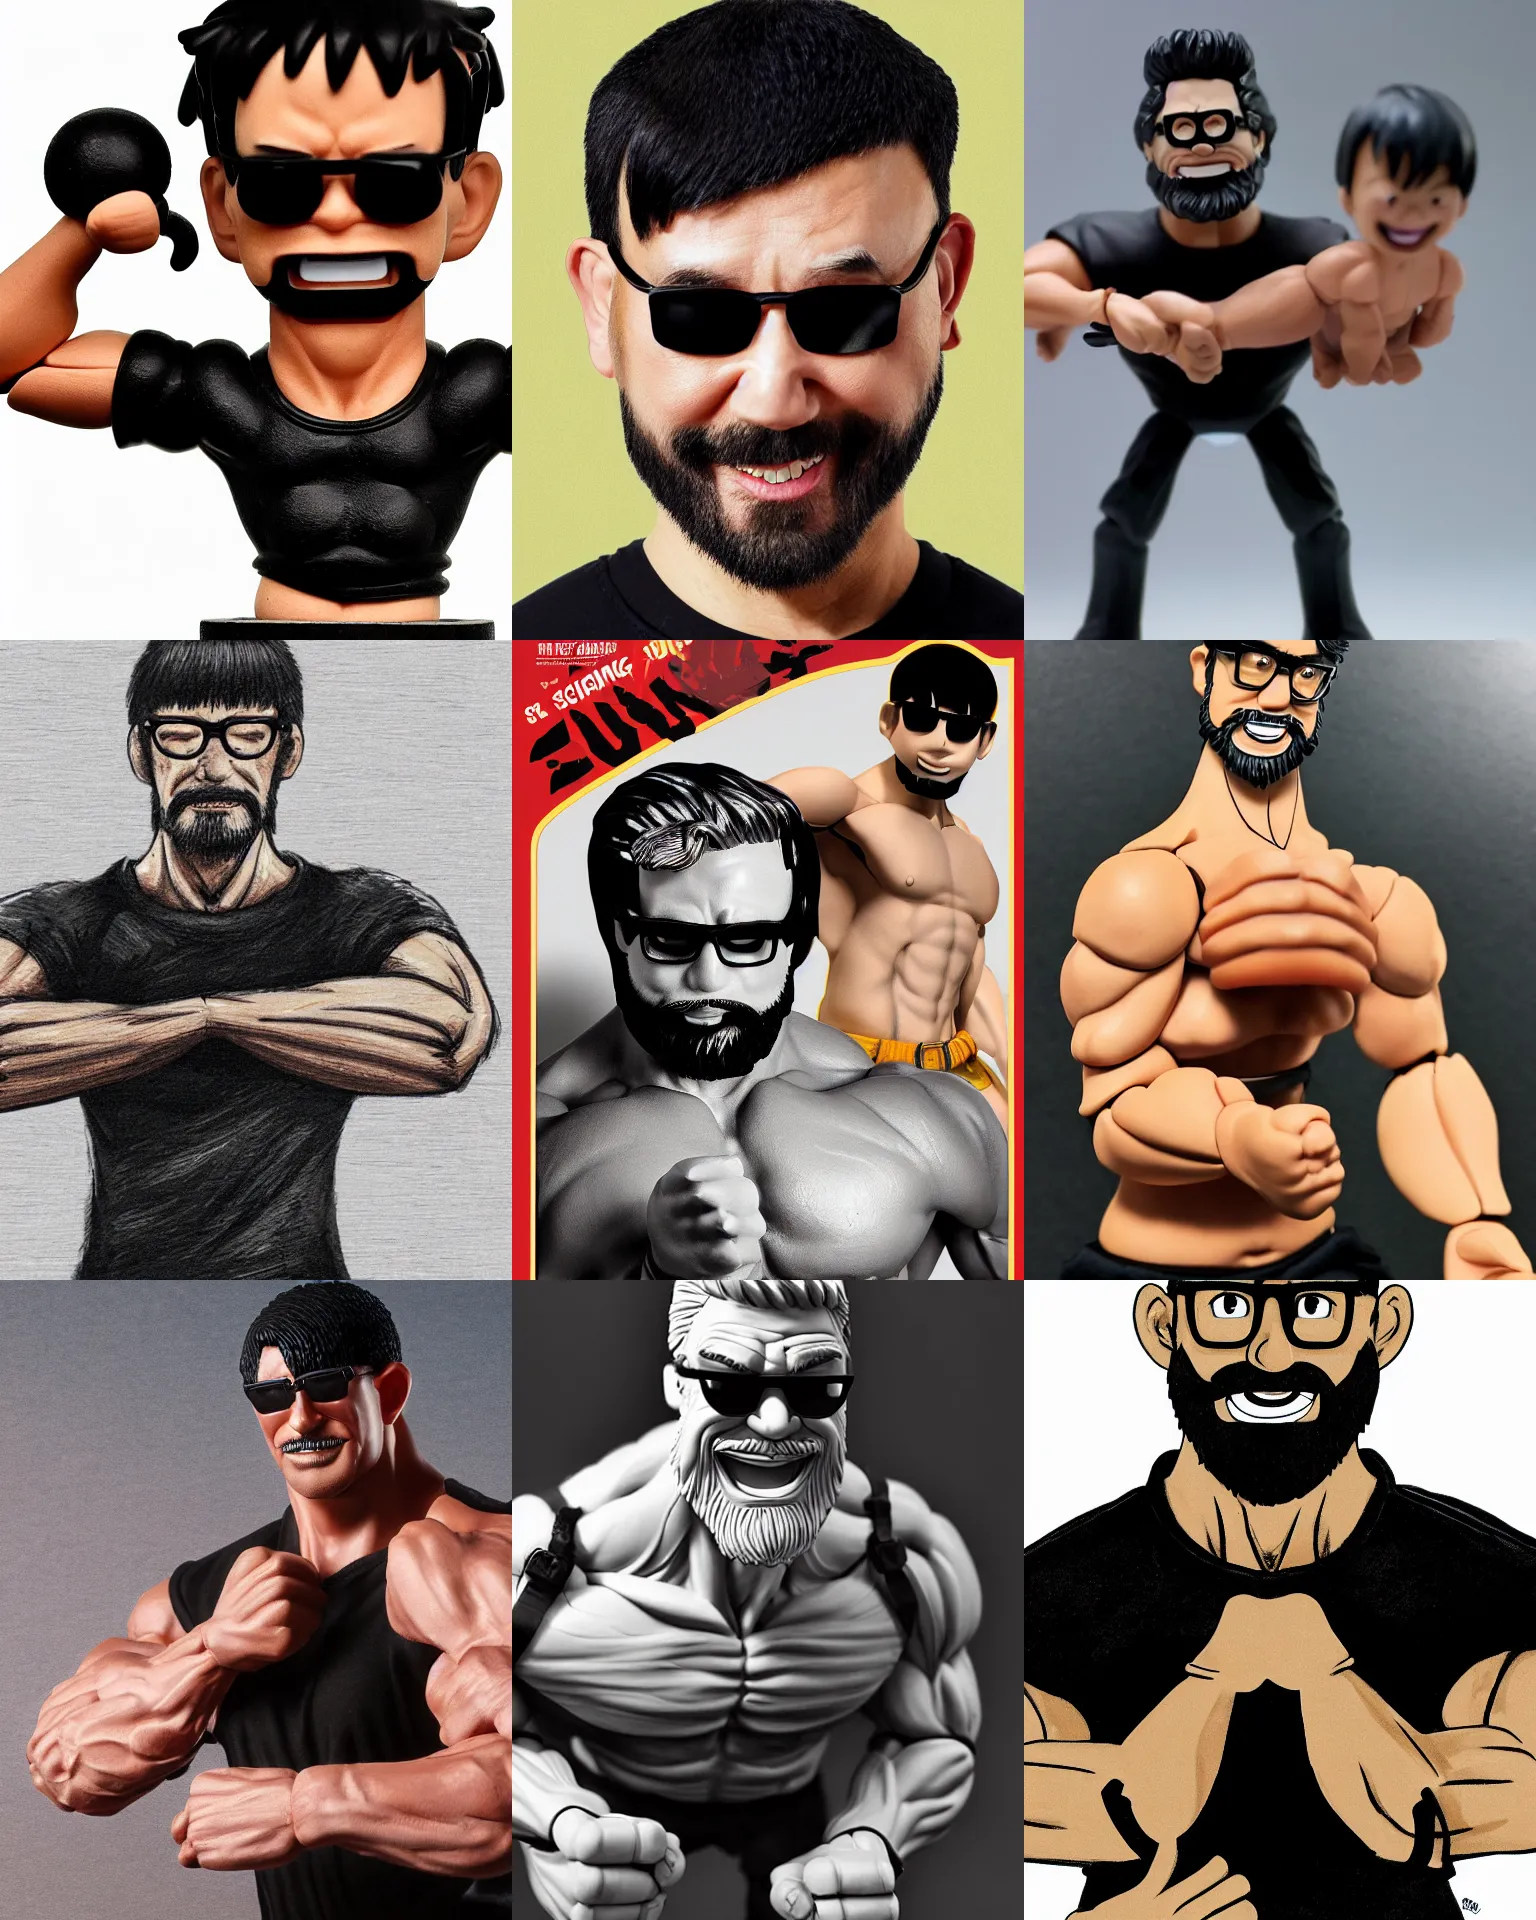 Prompt: plastic action figure of a buff smiling man doing push ups, long stubble beard, muscular neck, rectangular shaped glasses and a black bowl cut, wearing a black tshirt, dramatic light, blur, out - of - focus background, by kim jung gi, ric estrada, ron english and eiichiro oda